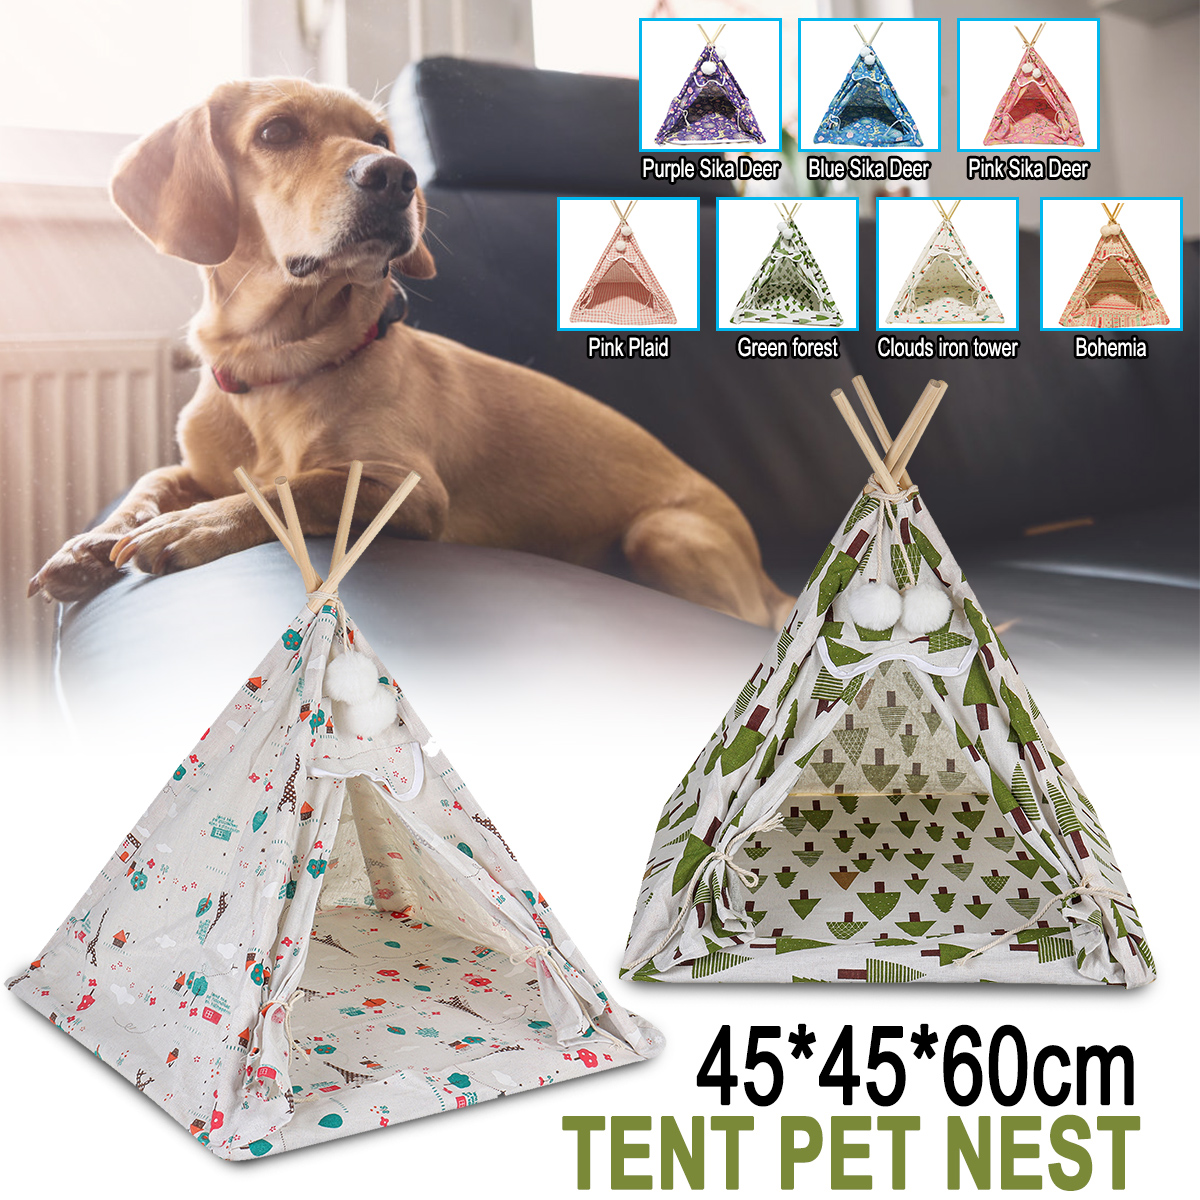 Foldable-Linen-Pet-Bed-Tent-Dog-House-Bed-Washable-Puppy-Cat-Play-Indoor-Teepee-Mat-1691904-2